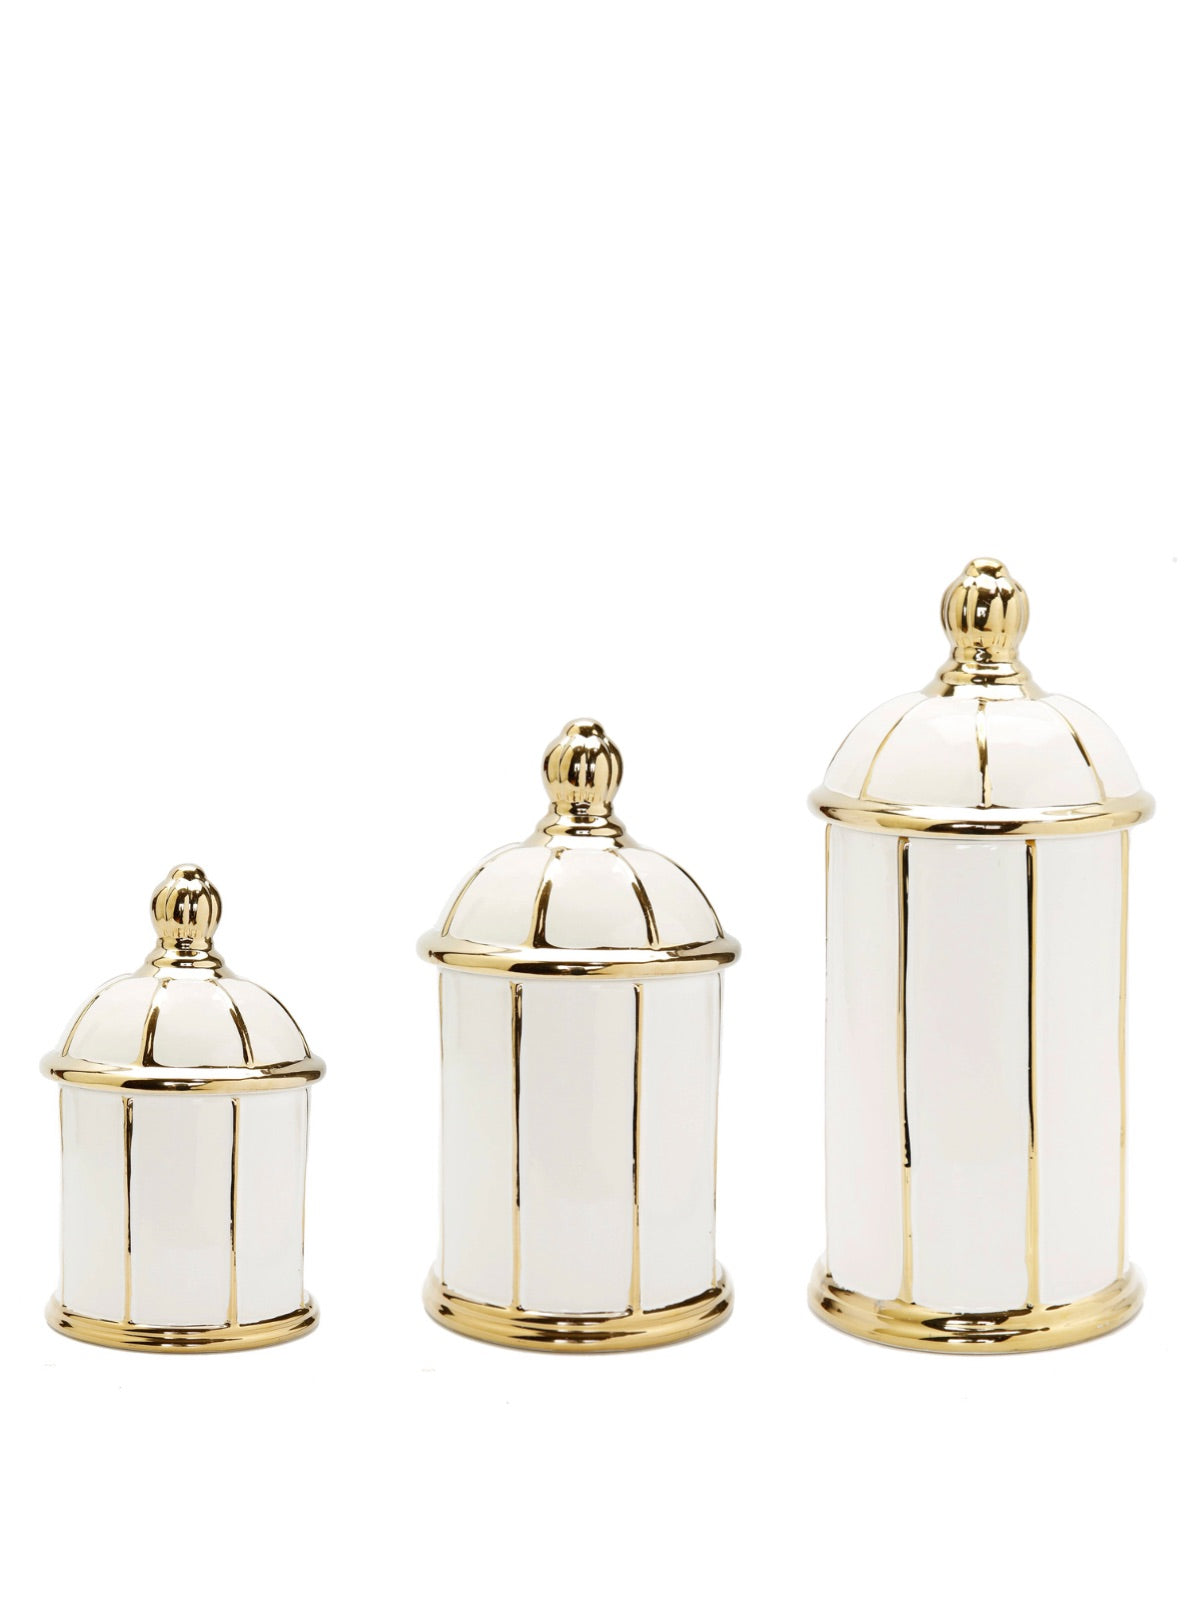 White and gold striped ceramic kitchen jars with dome design lid, available in 3 Sizes - KYA Home Decor.